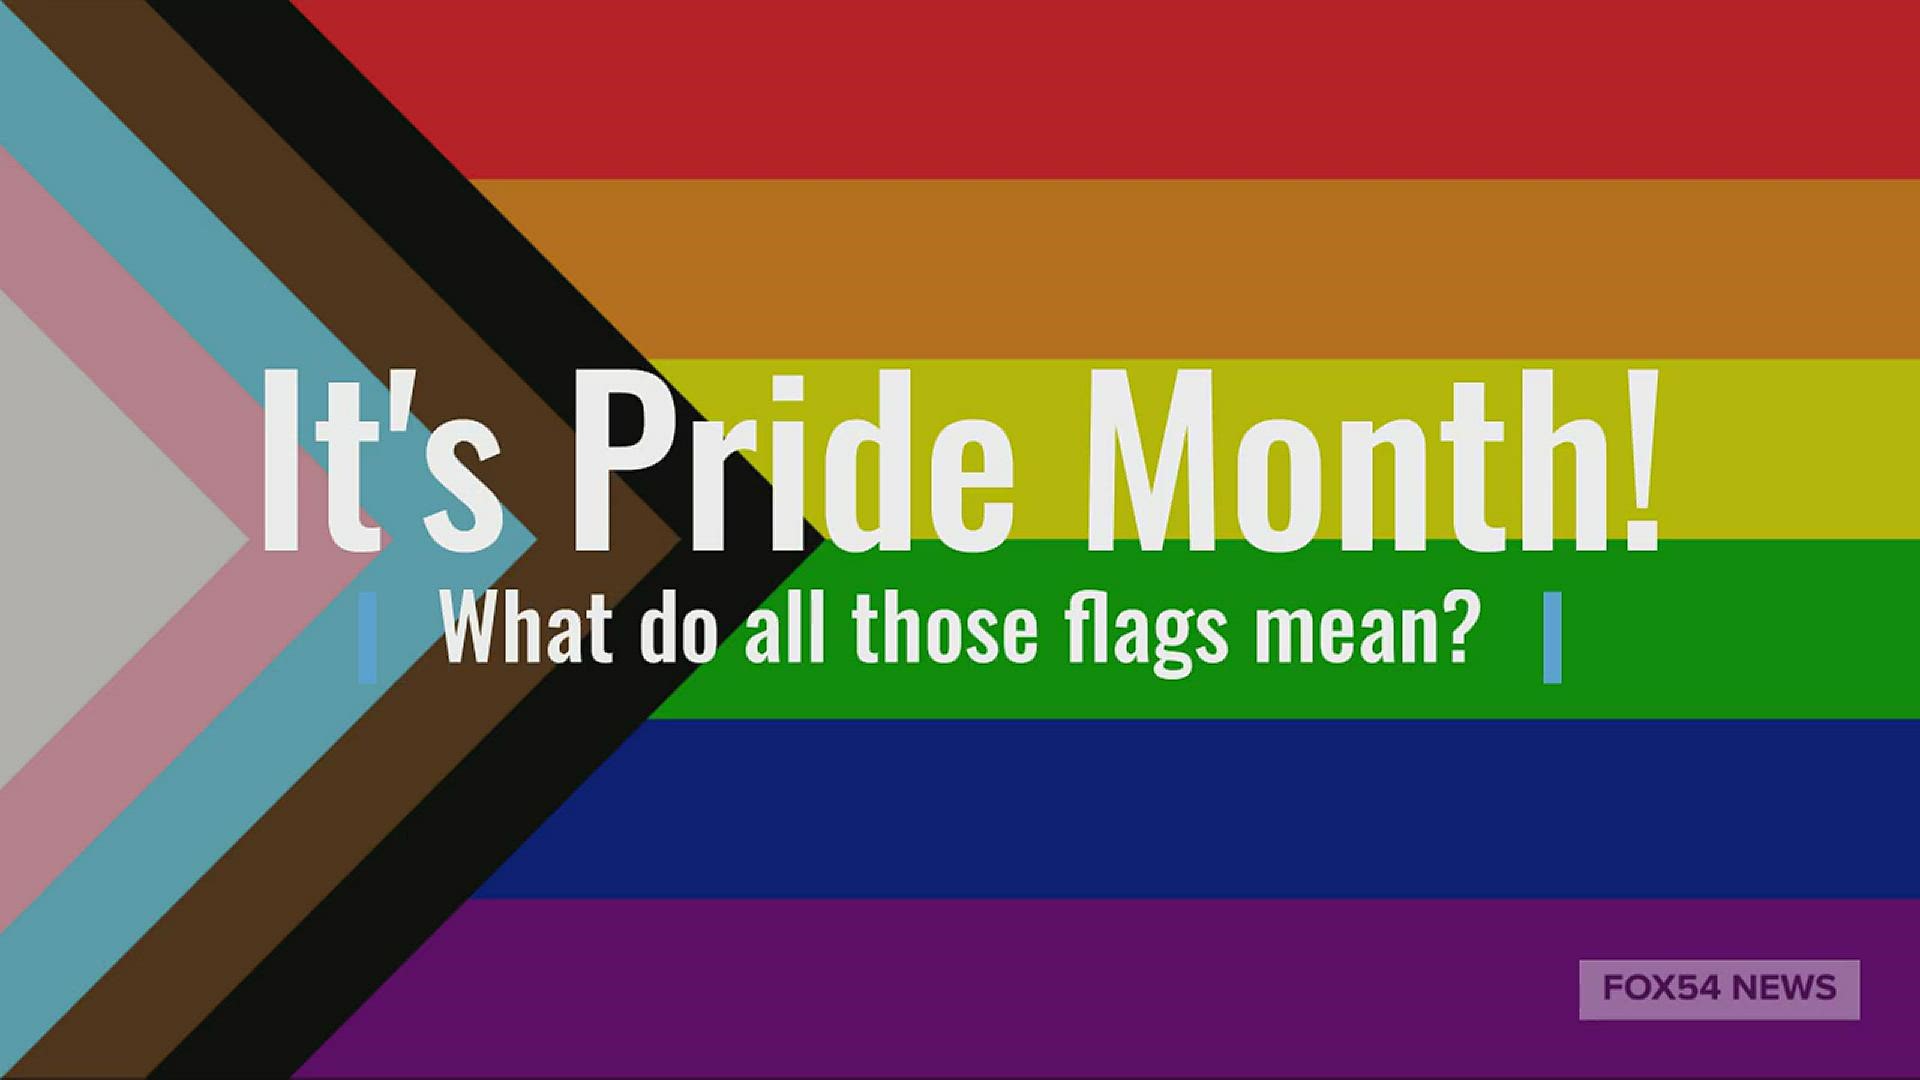 It's Pride Month! LGBTQ flags are out...what do they mean?